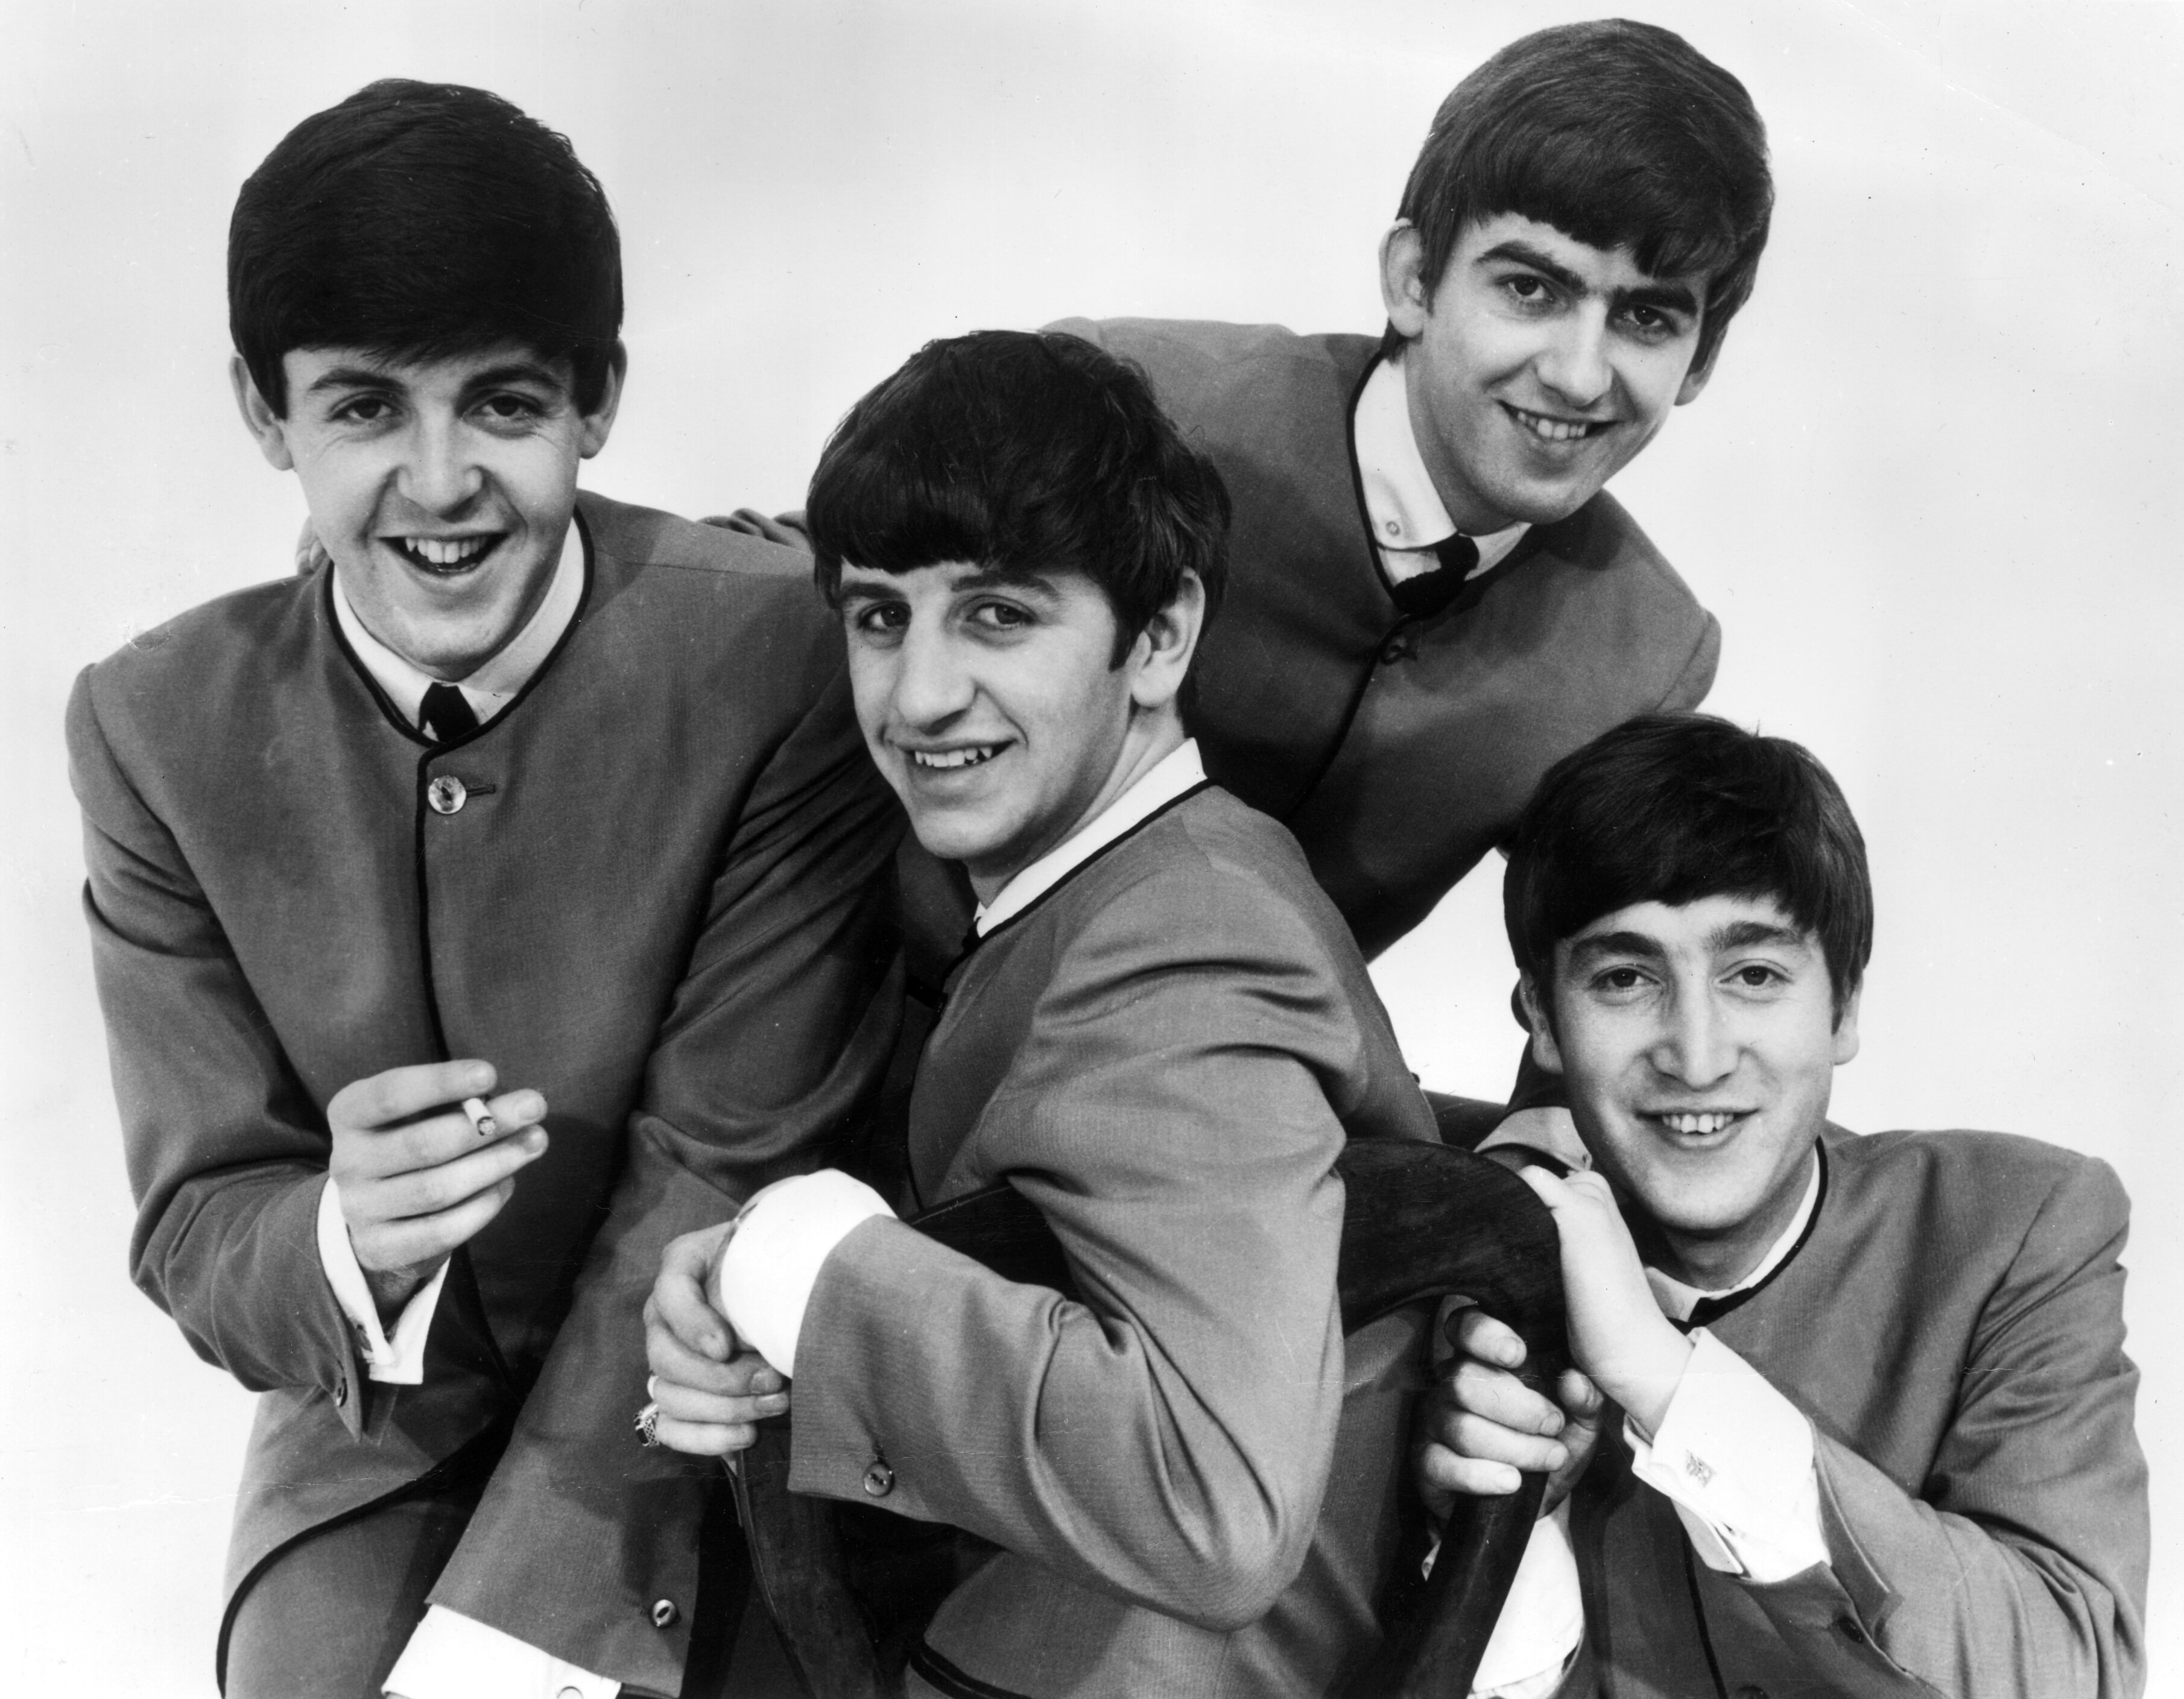 The Beatles with mop tops